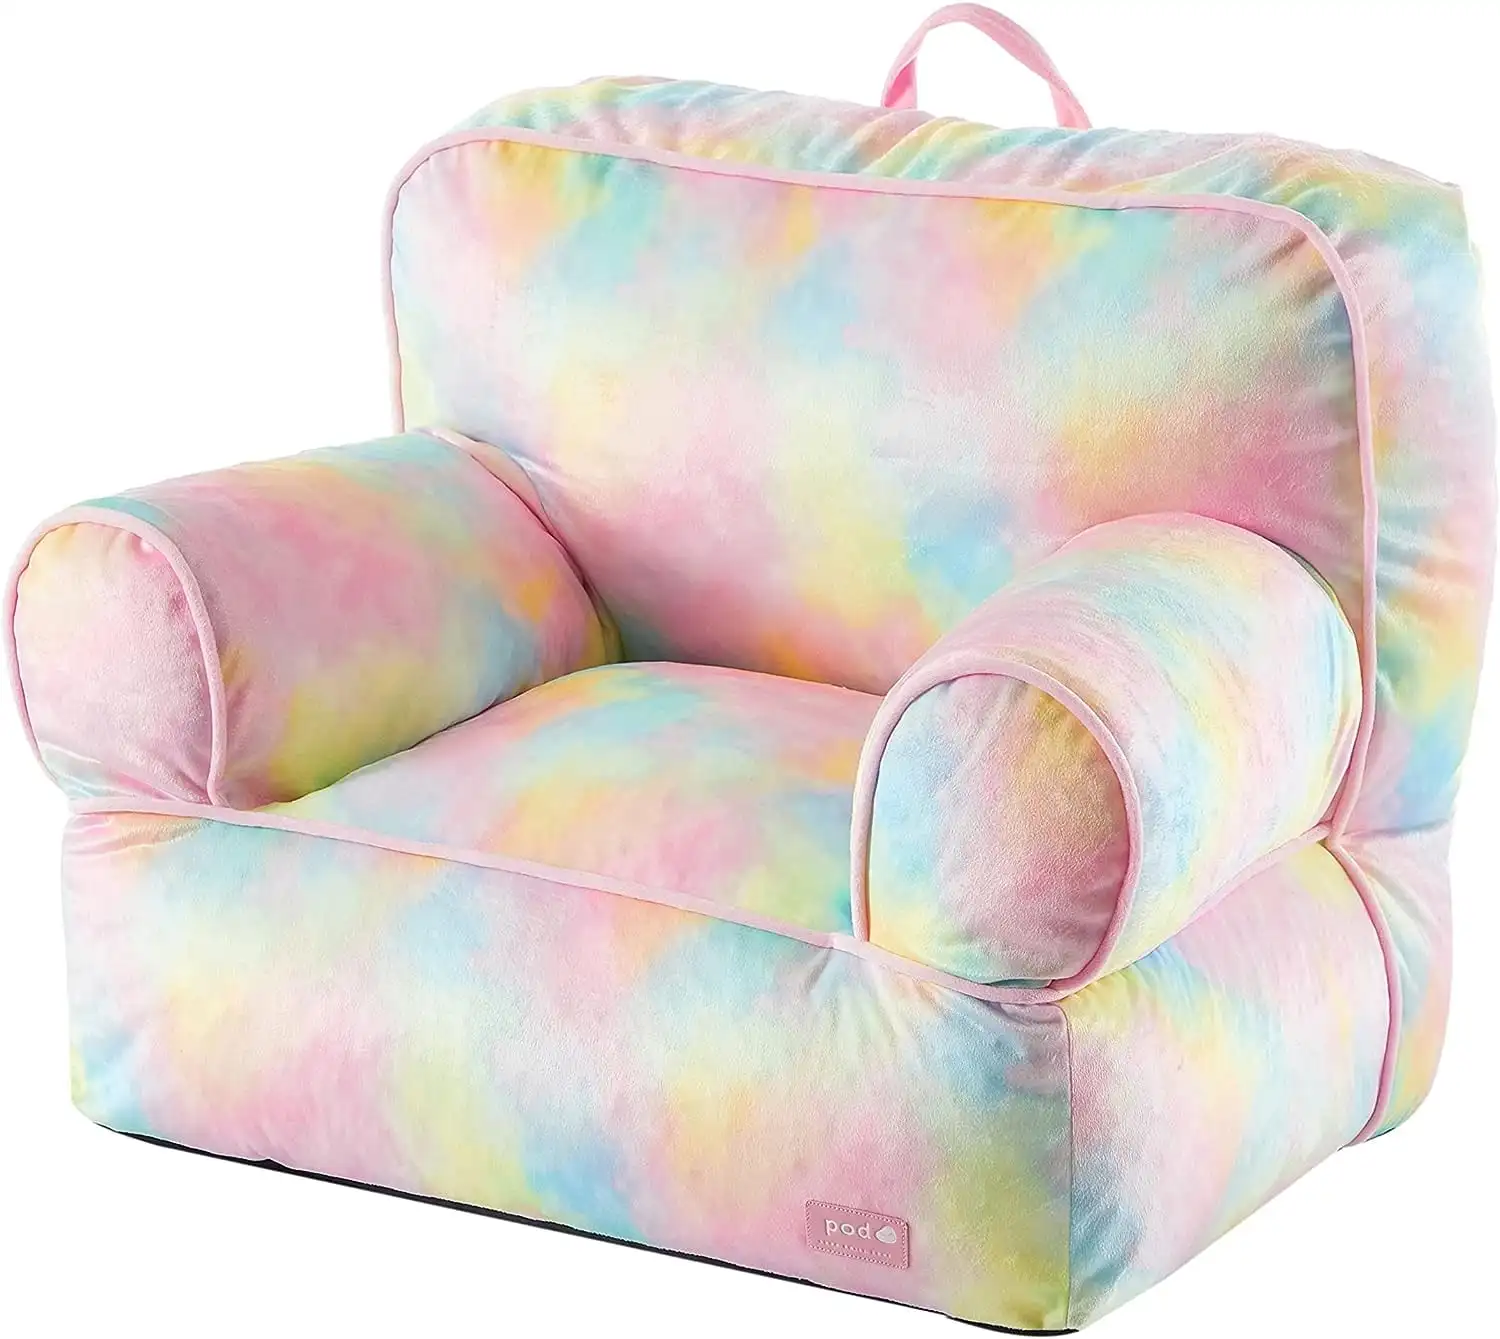 

Tie Dye Bean Bag Sofa Chair Filling Lazy Sofa Couch with Soft Mink Cover for Kids, 23" W x 19" D x 17" H